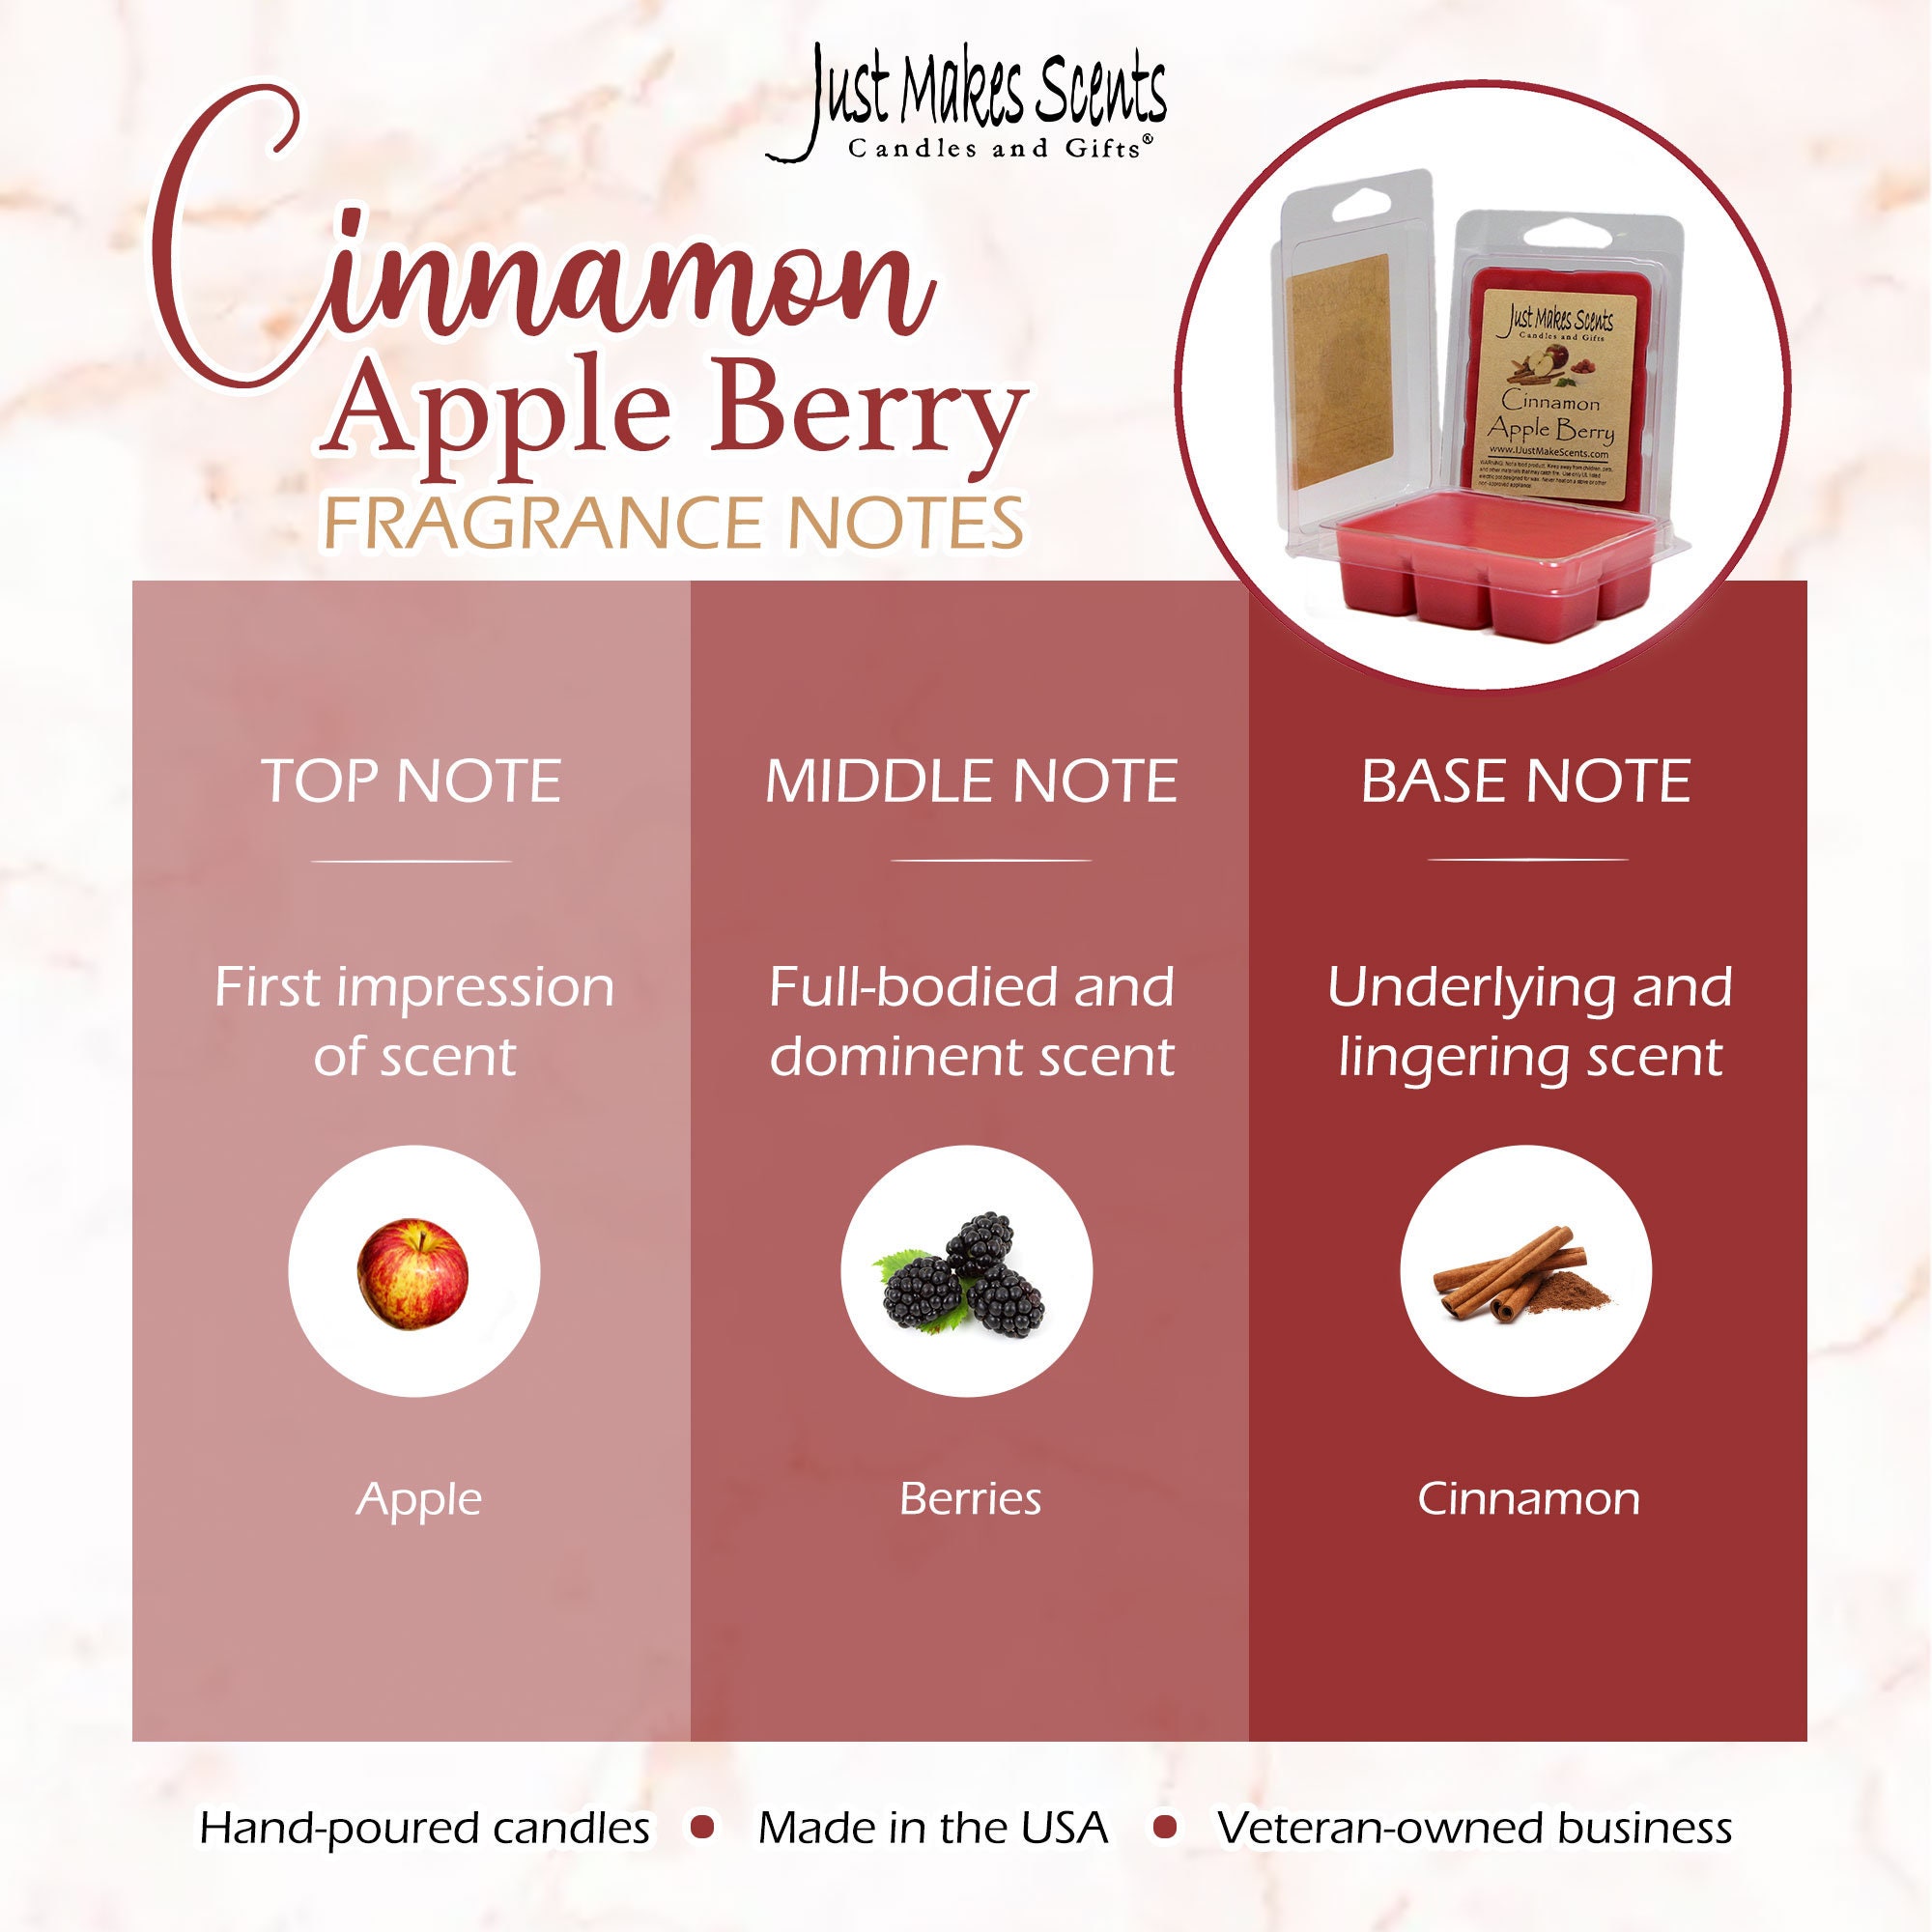 Cinnamon Apple Berry Scented Wax Melts 2 Pack With FREE SHIPPING Scented  Soy Wax Cubes Compare to Scentsy® Wax Melts 